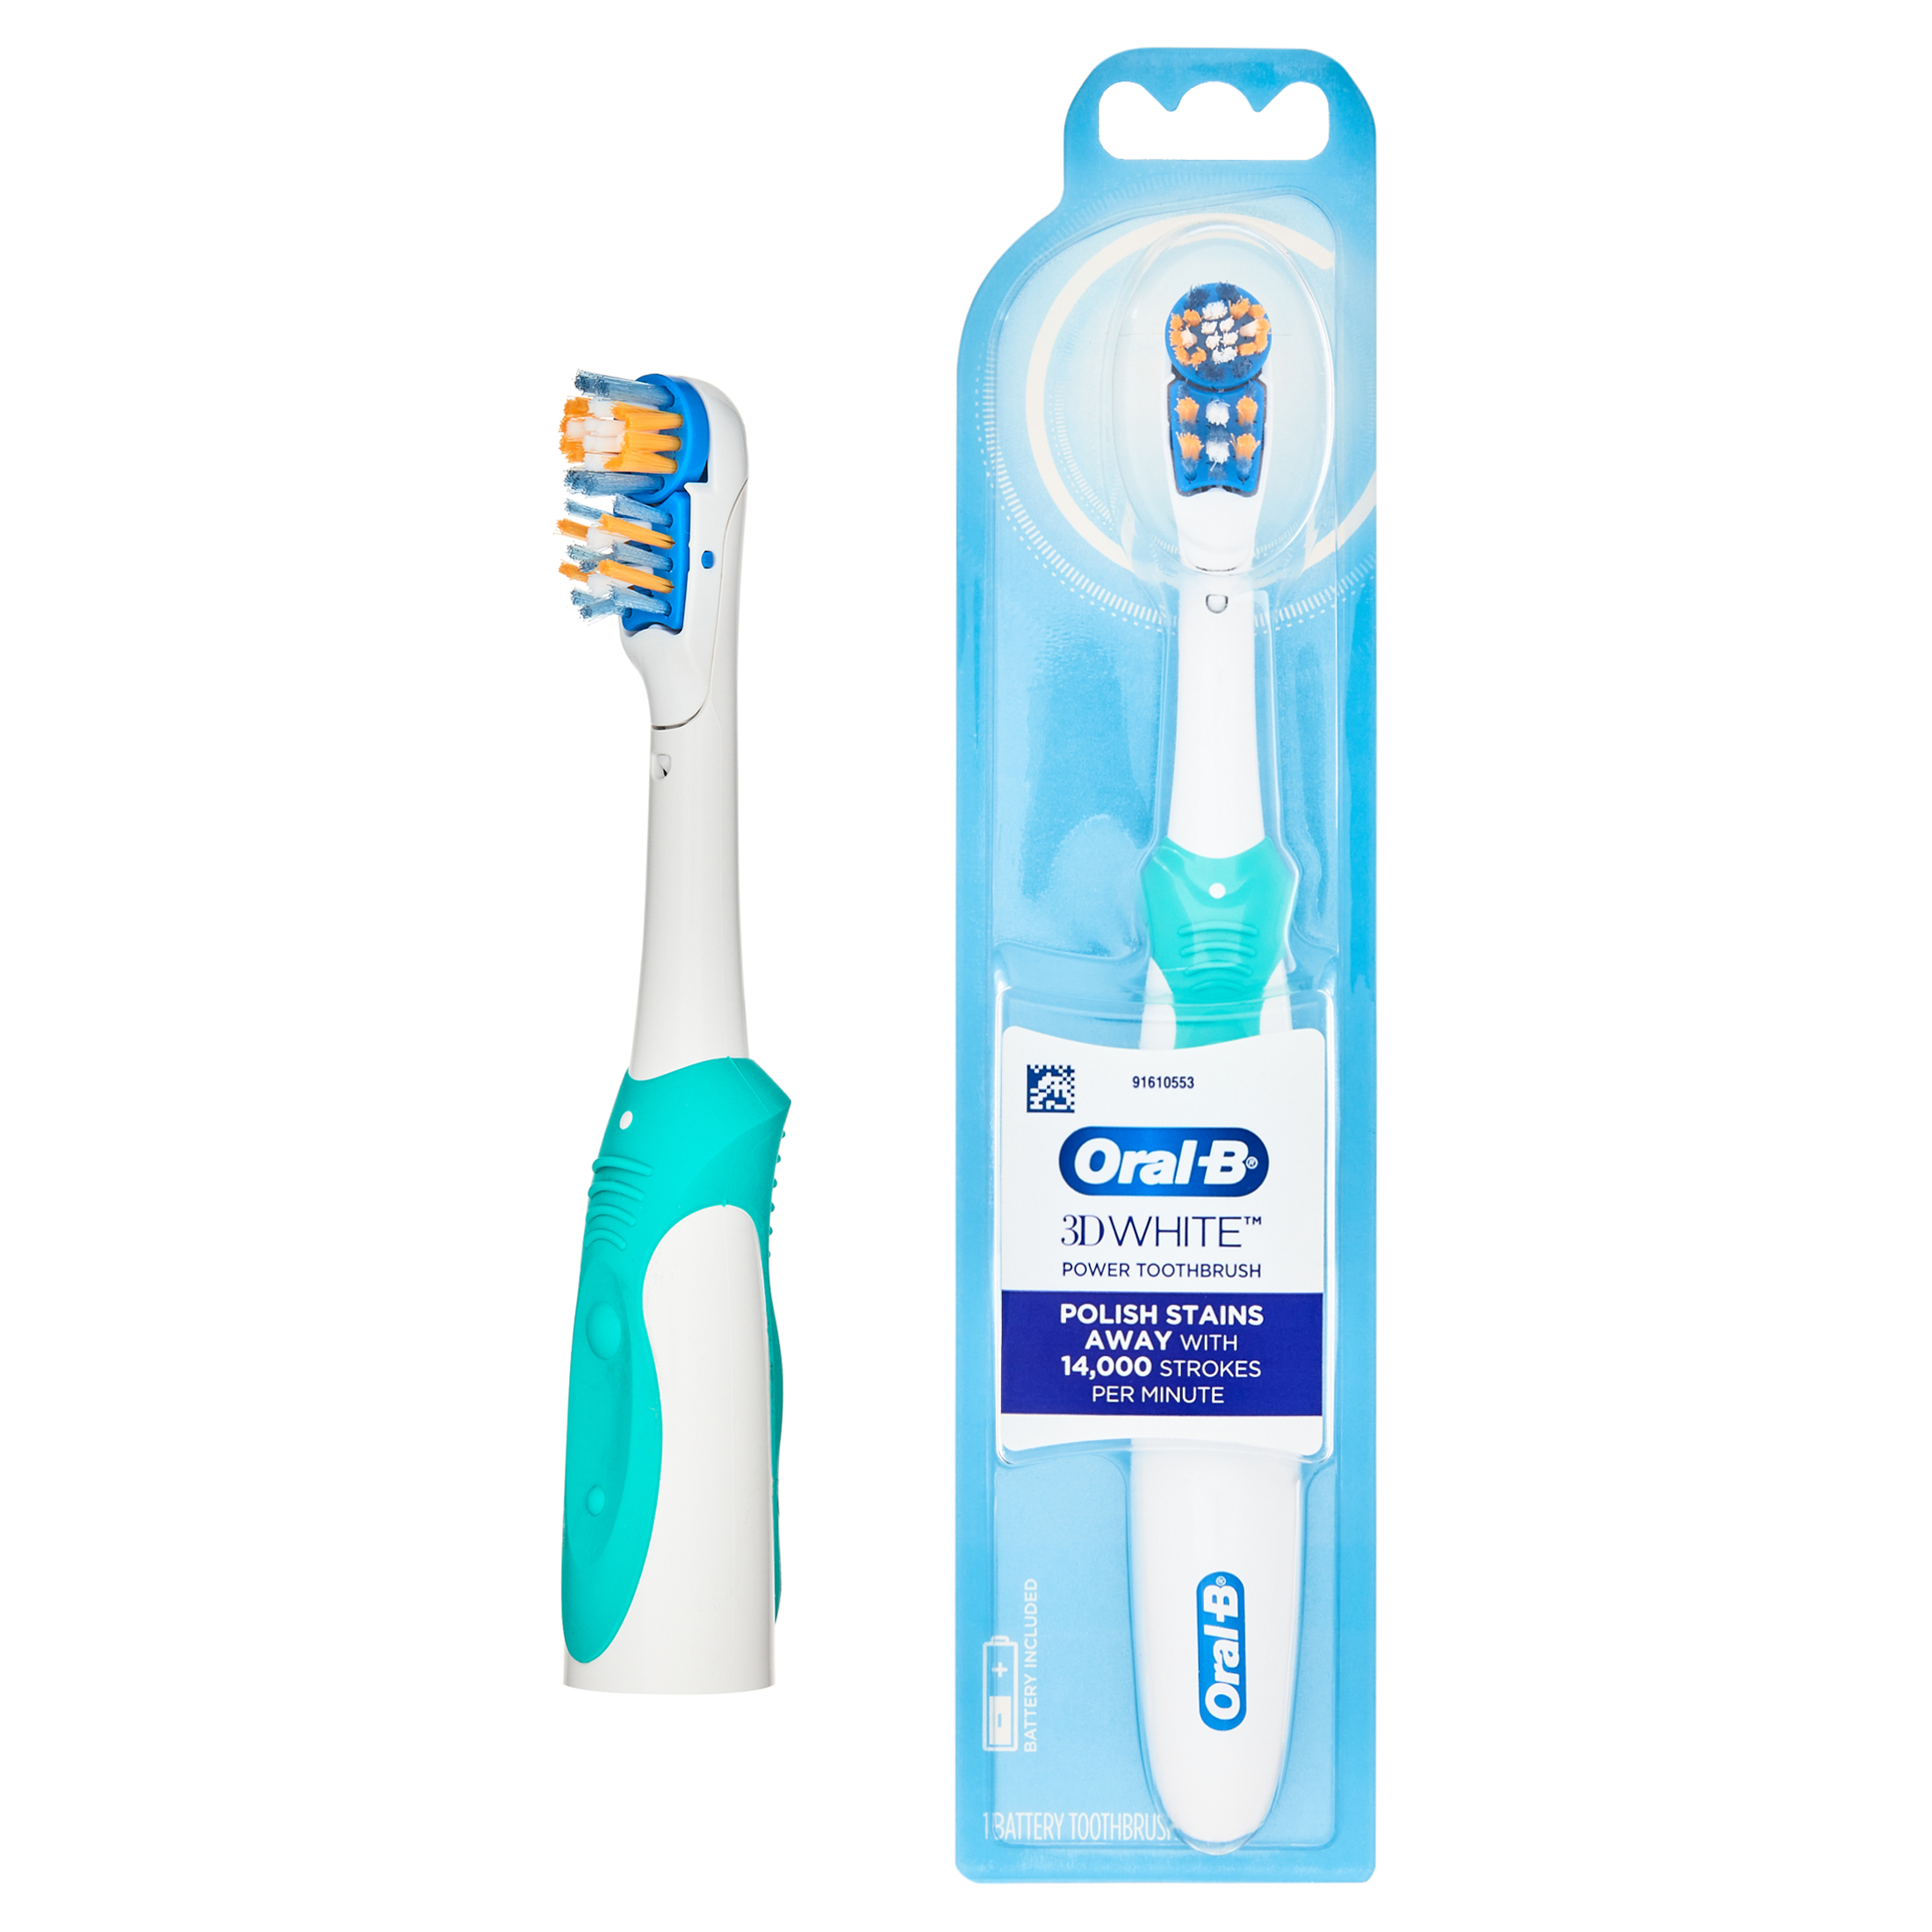 Oral-B 3D White Battery Toothbrush, 1 Count, Colors May Vary, for Adults and Children 3+ - image 1 of 12